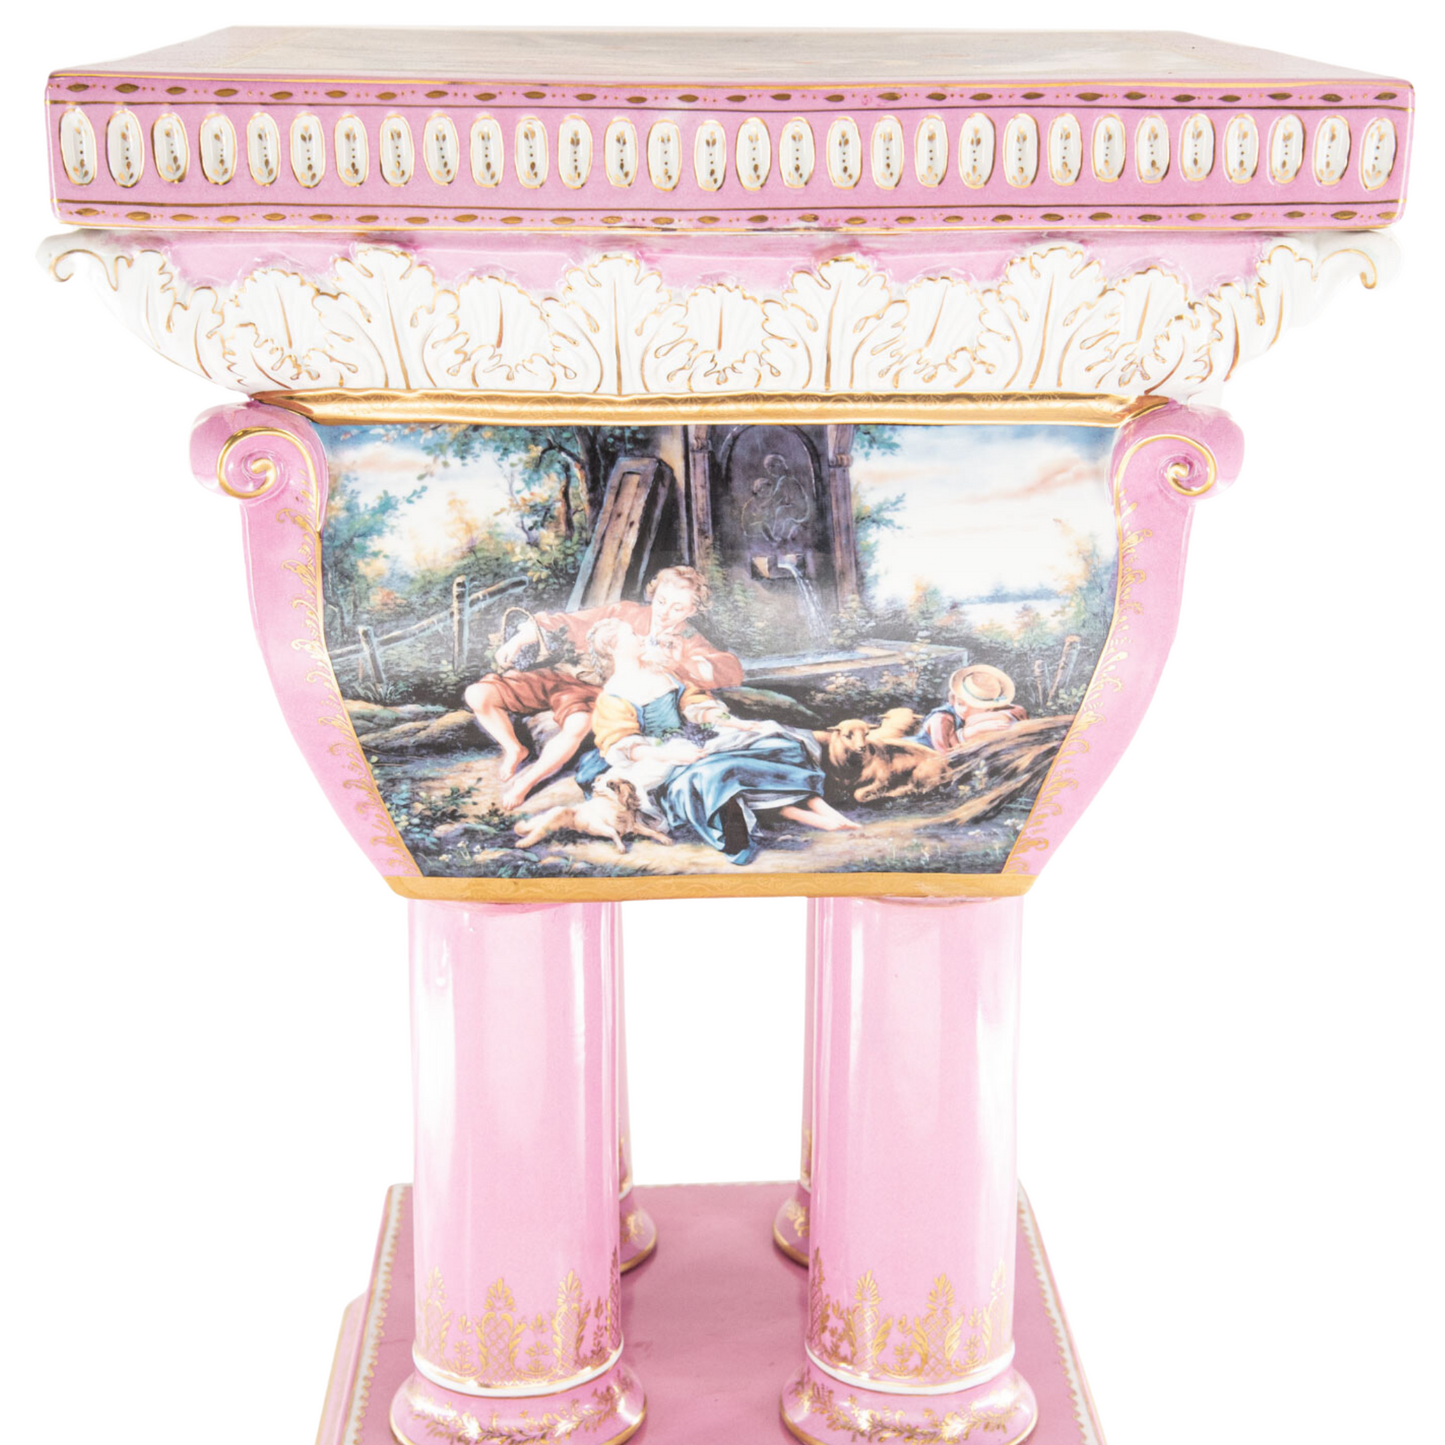 Hand-painted Pink Baroque Style Furniture Porcelain Chair